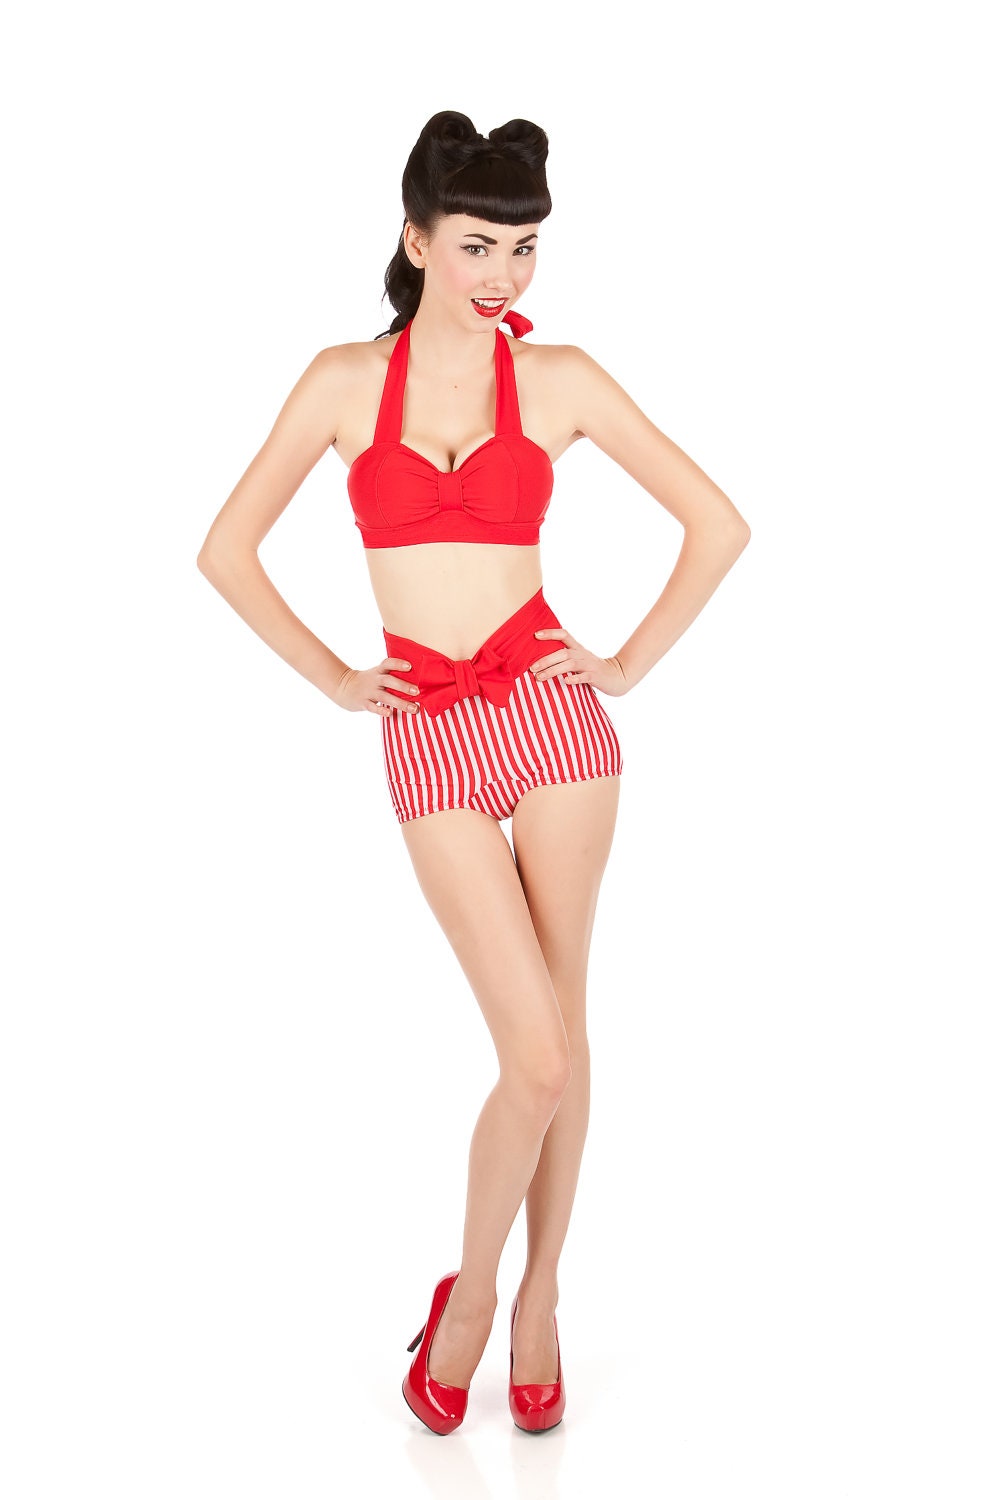 KANDY Red and White Stripes Bottom With Bow Sizes S, L, XL